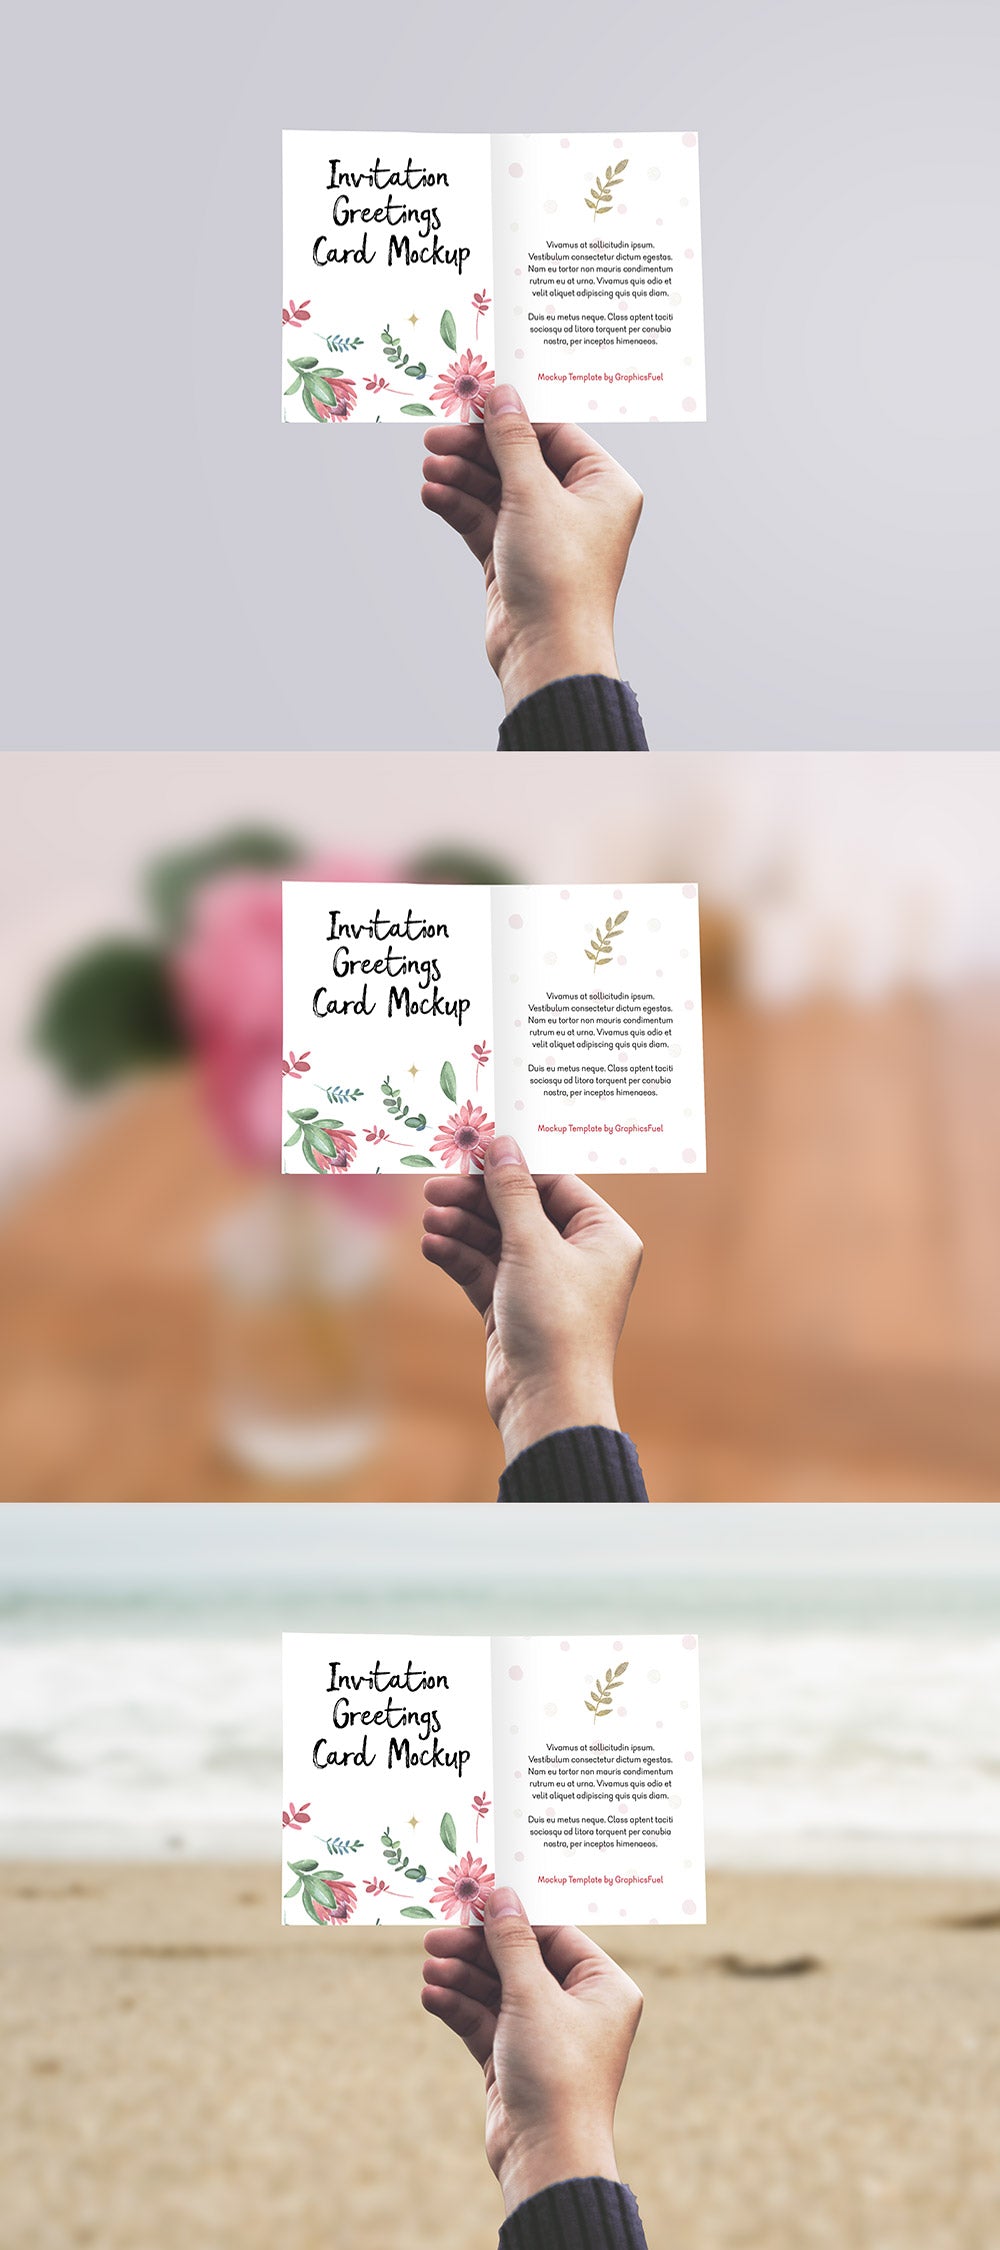 Free Invitation or Greeting Card in Hand Mockup PSD